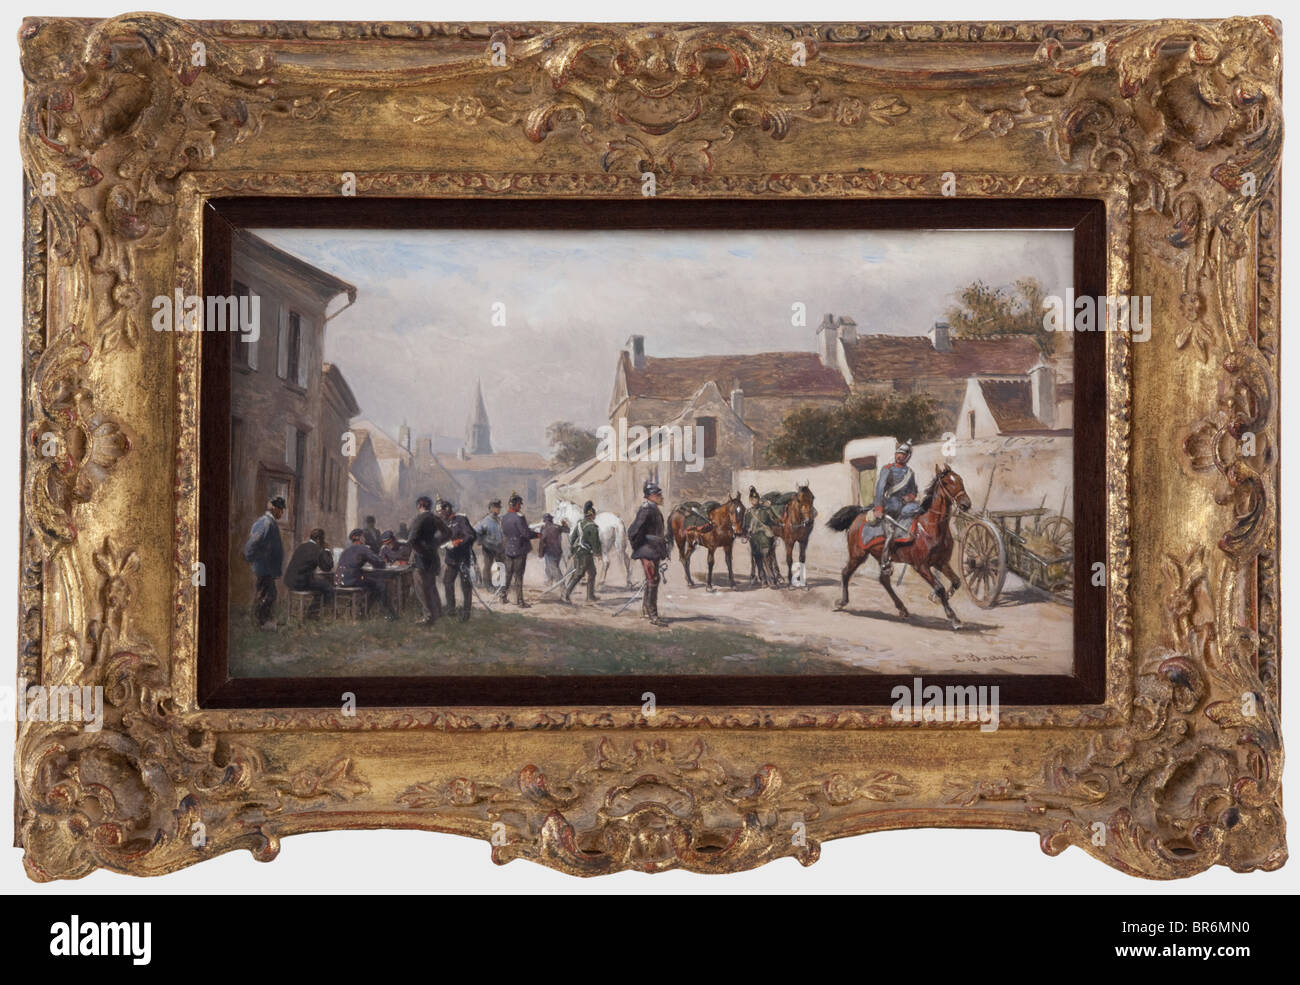 Louis Braun (1836 - 1916) - 'In front of the town hall of a village in the Ardennes', oil on wood. Street scene from the Franco-German War 1870/71, officers sitting at a table, a passing dragoon on horseback and two Bavarian chevaulegers with their horses. Signed on the lower right 'L. Braun', on the back title of the painting handwritten by the artist(?), size 26 x 14 cm, vintage plaster frame. The scene gives the impression of a snapshot and therefore suggests that the picture was painted on site by Louis Braun. He was one of the best known and most renowned , Stock Photo